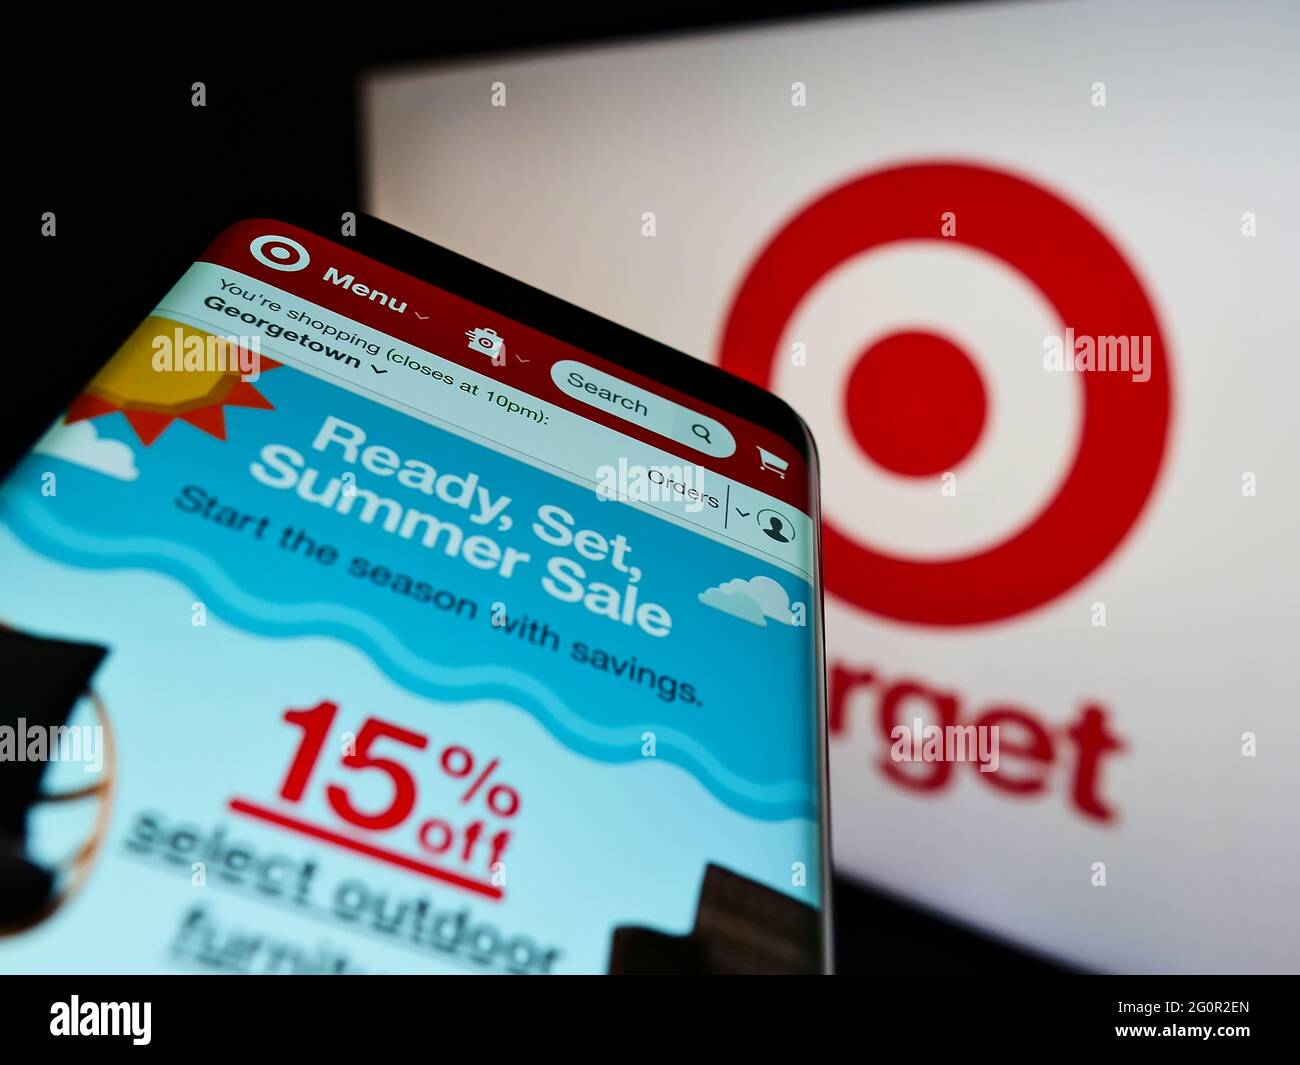 Mobile phone with website of US retail company Target Corporation on screen in front of business logo. Focus on top-left of phone display. Stock Photo